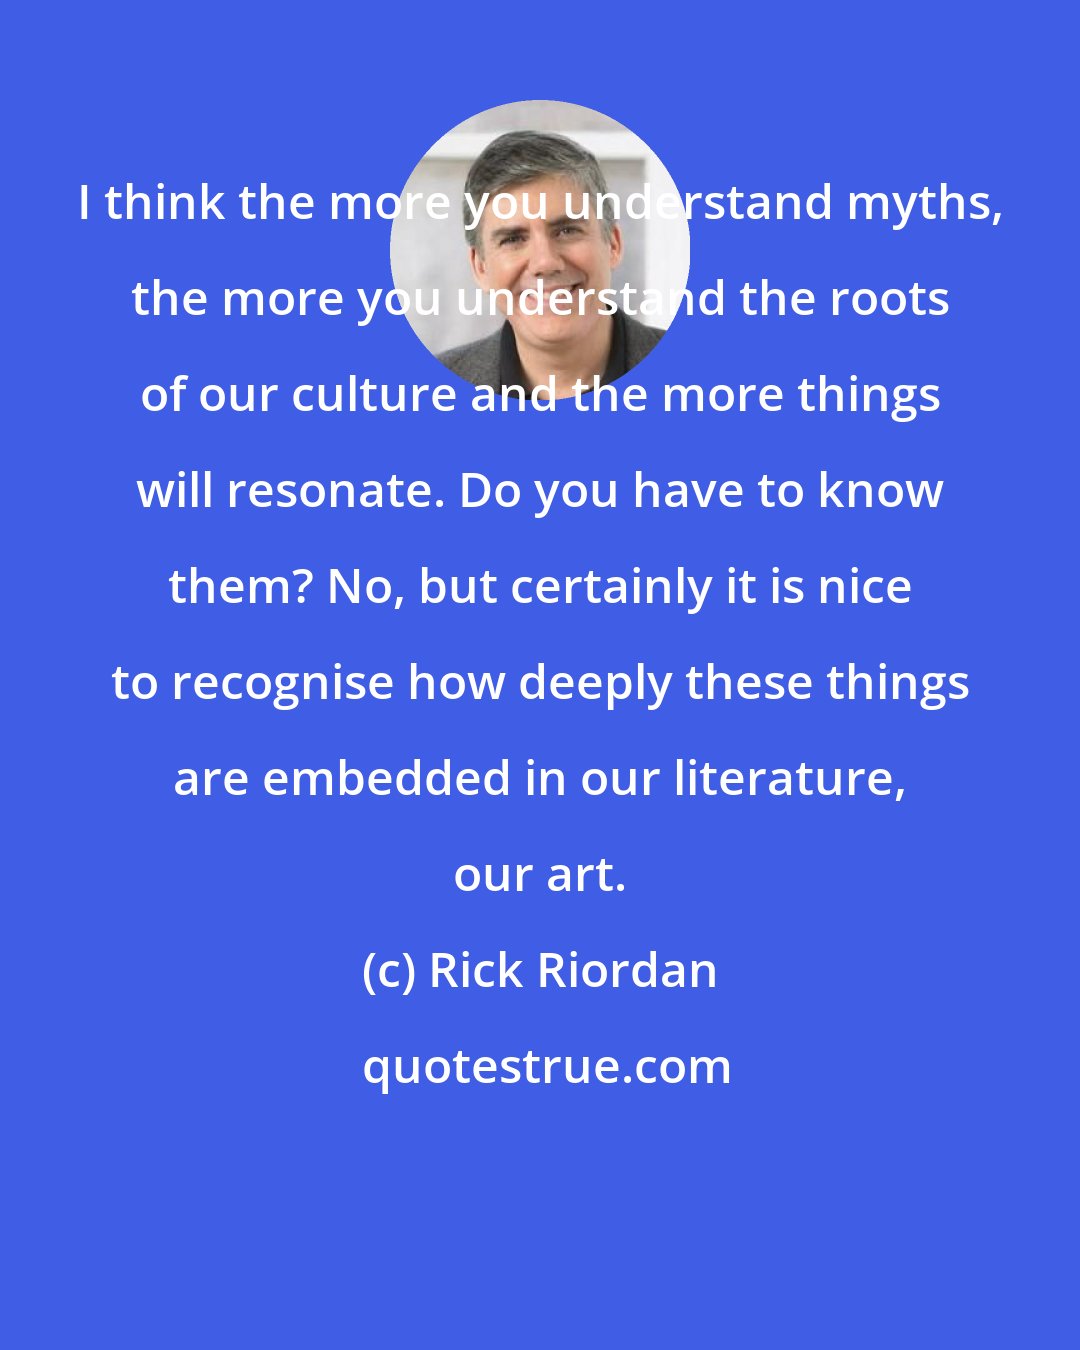 Rick Riordan: I think the more you understand myths, the more you understand the roots of our culture and the more things will resonate. Do you have to know them? No, but certainly it is nice to recognise how deeply these things are embedded in our literature, our art.